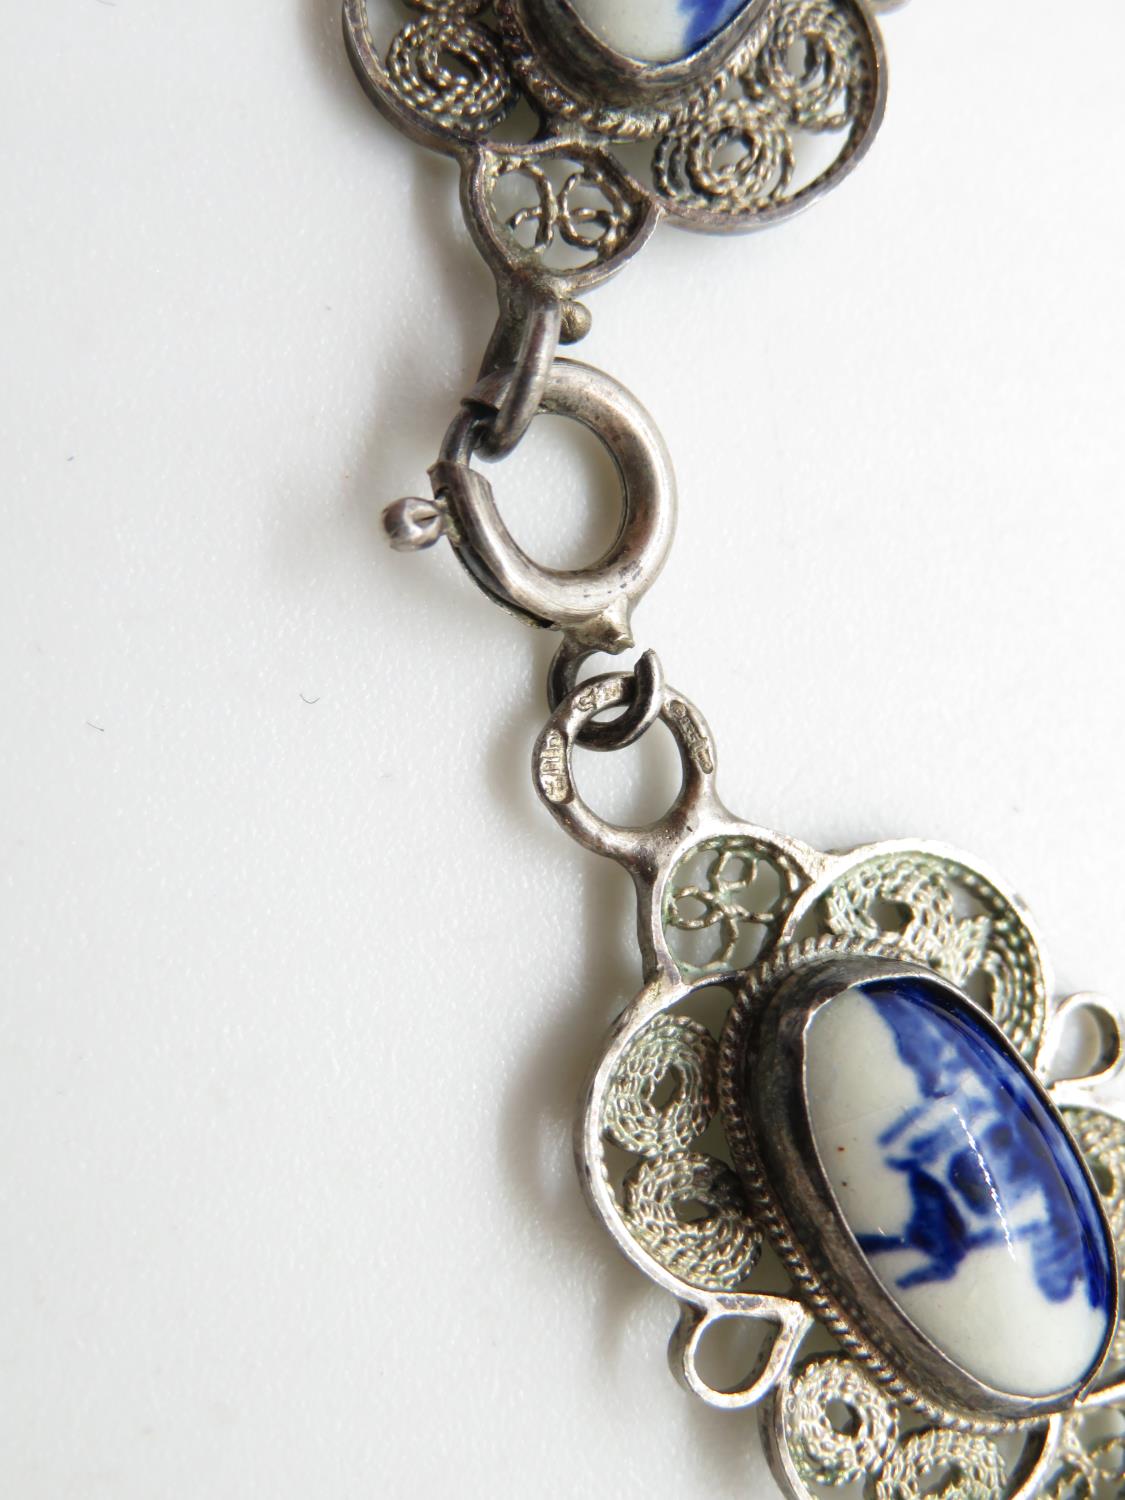 835 stamped silver windmill bracelet12.2g - Image 4 of 4